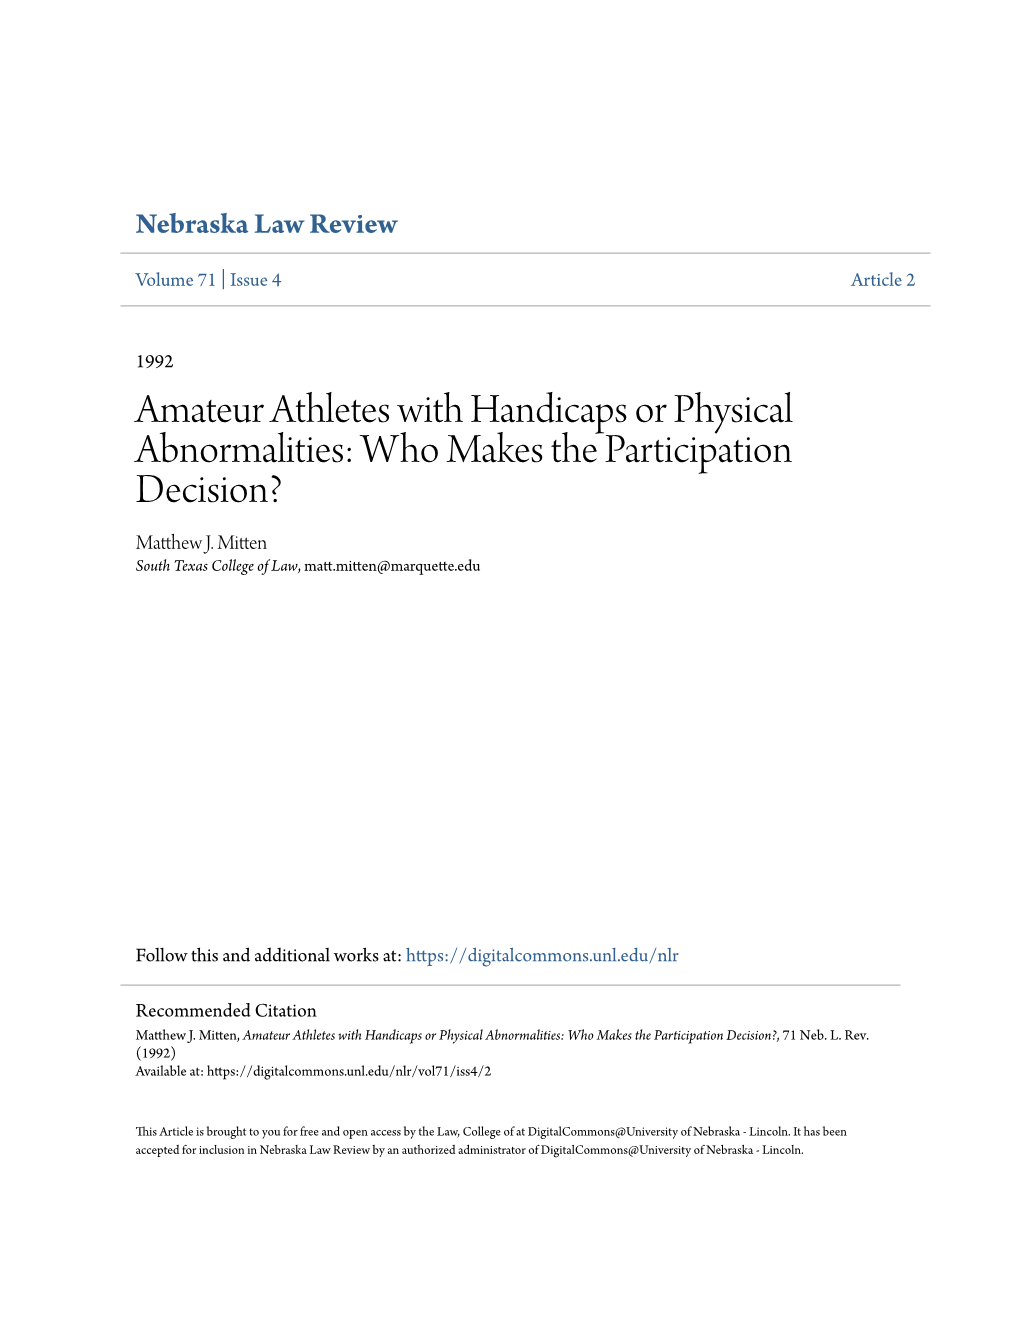 Amateur Athletes with Handicaps Or Physical Abnormalities